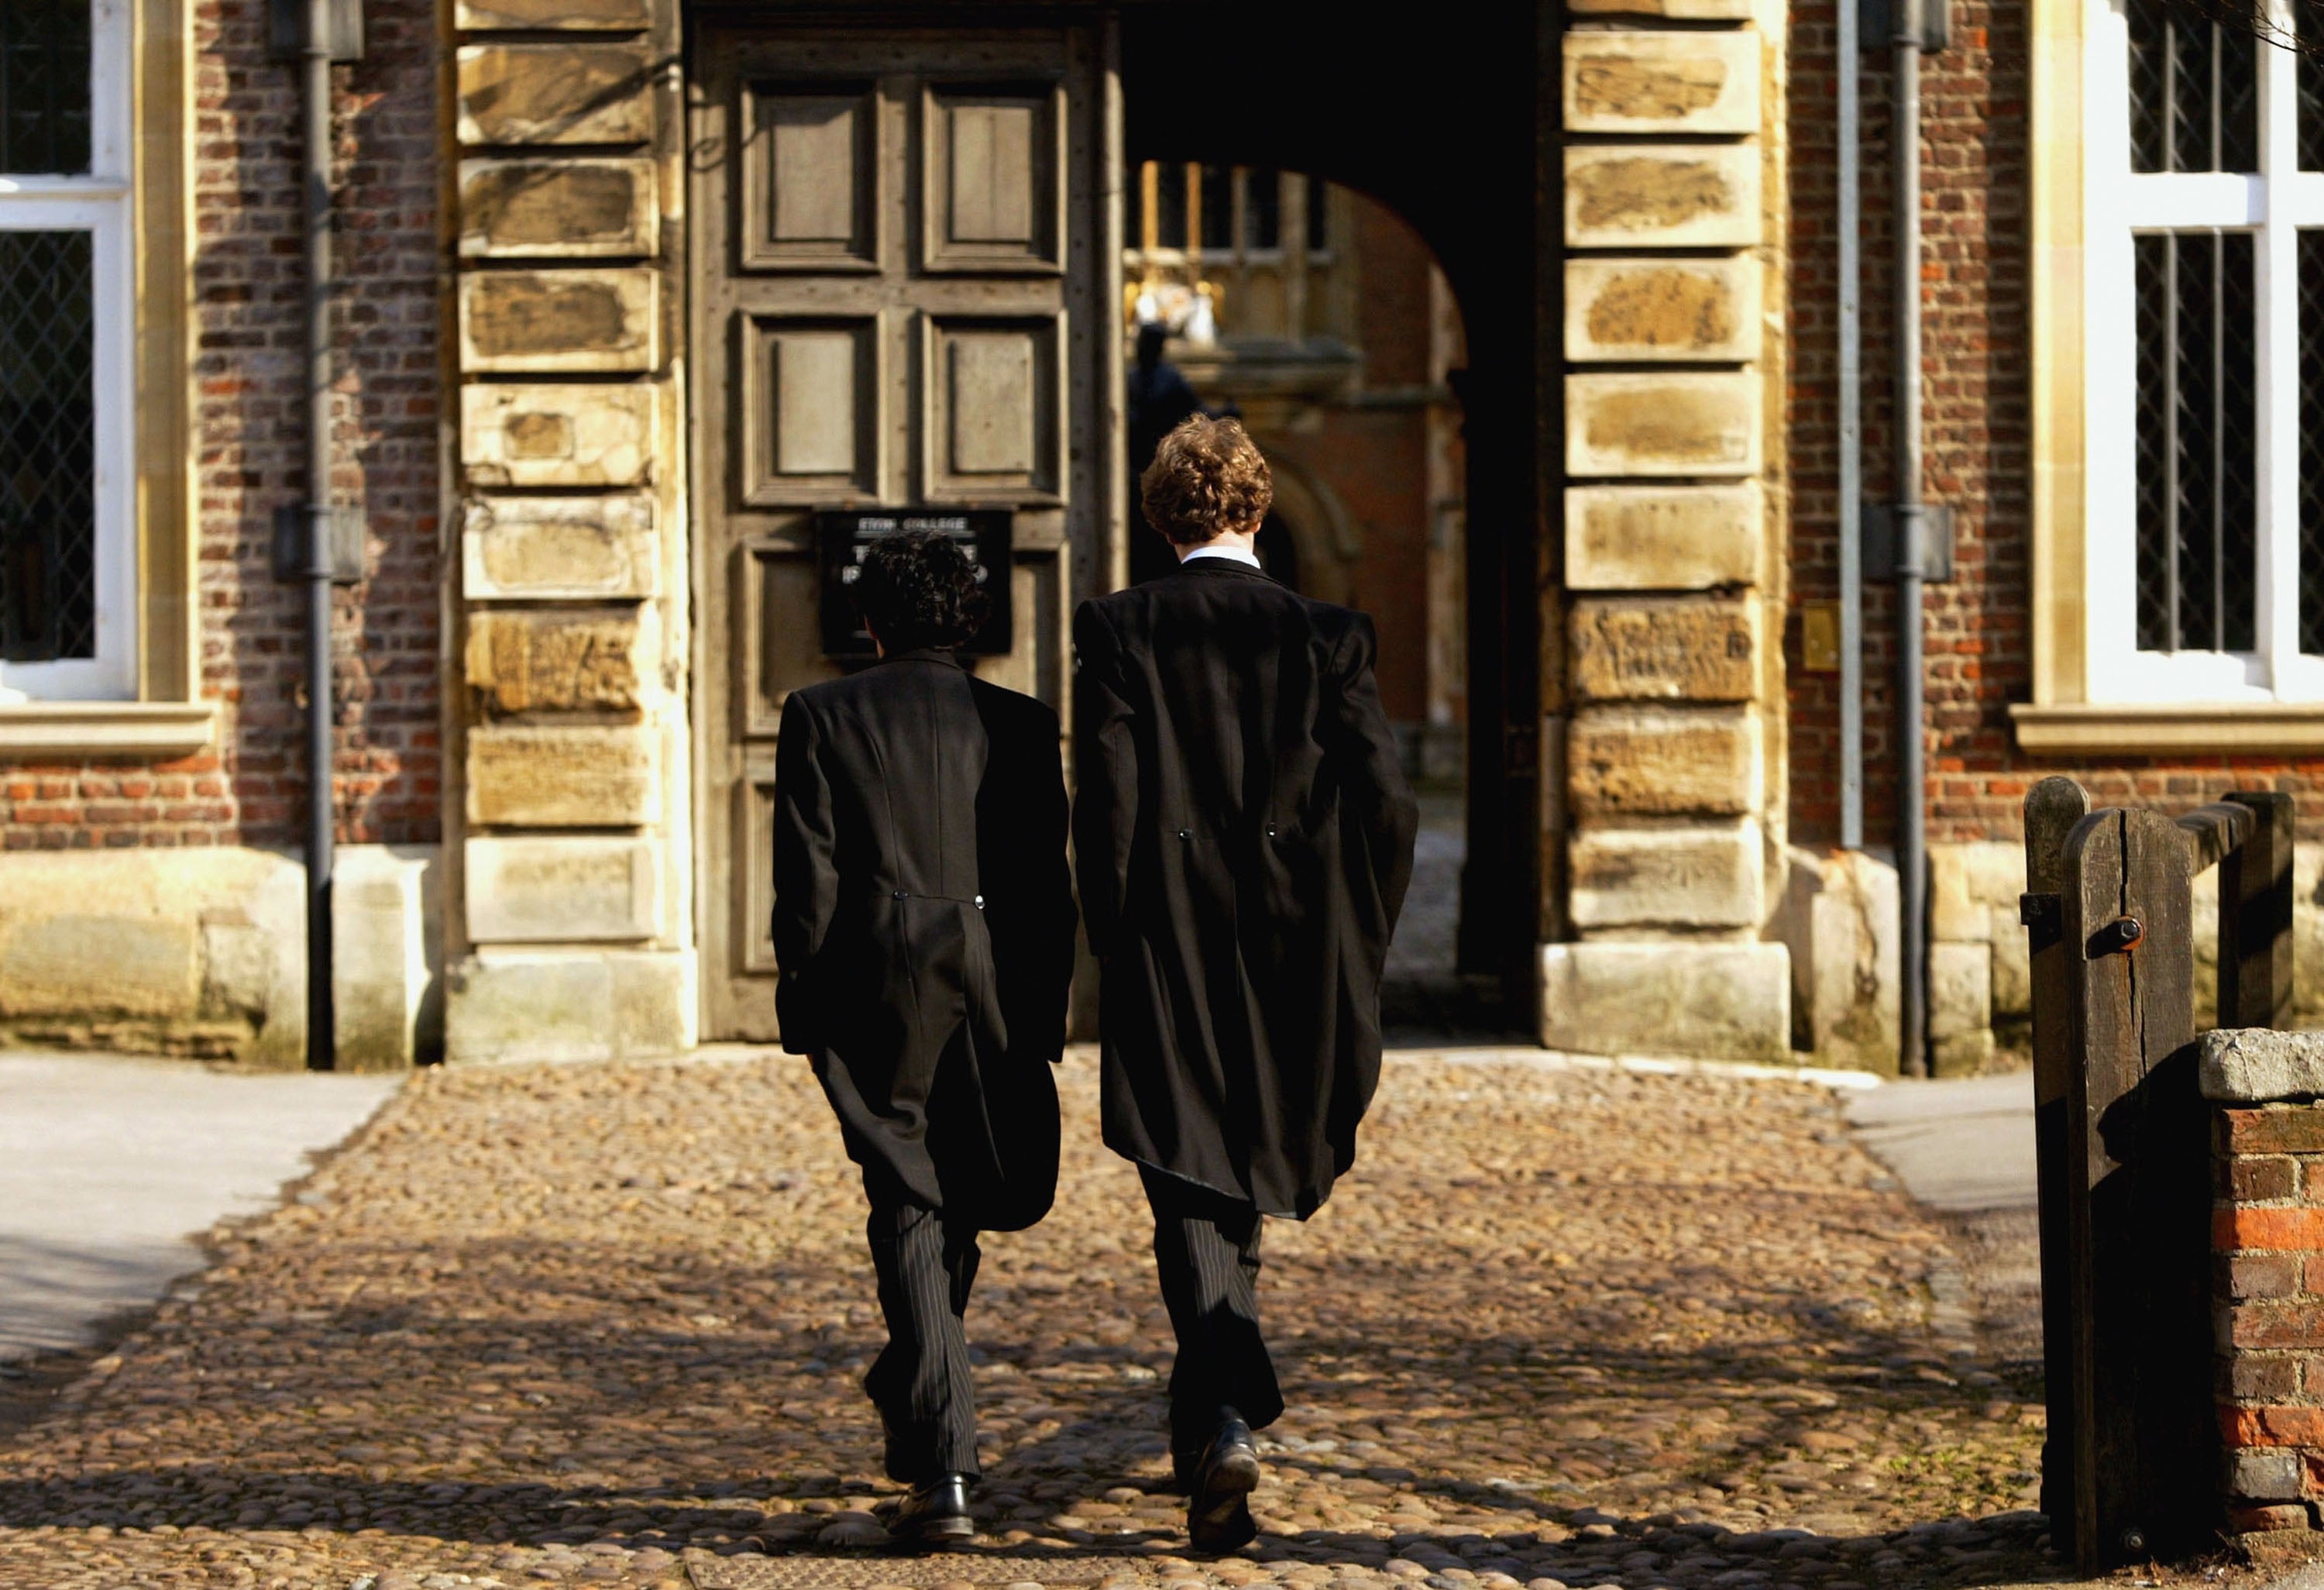 According to the analysis Eton College was at the top of the list with 47 staff earning over £100,000